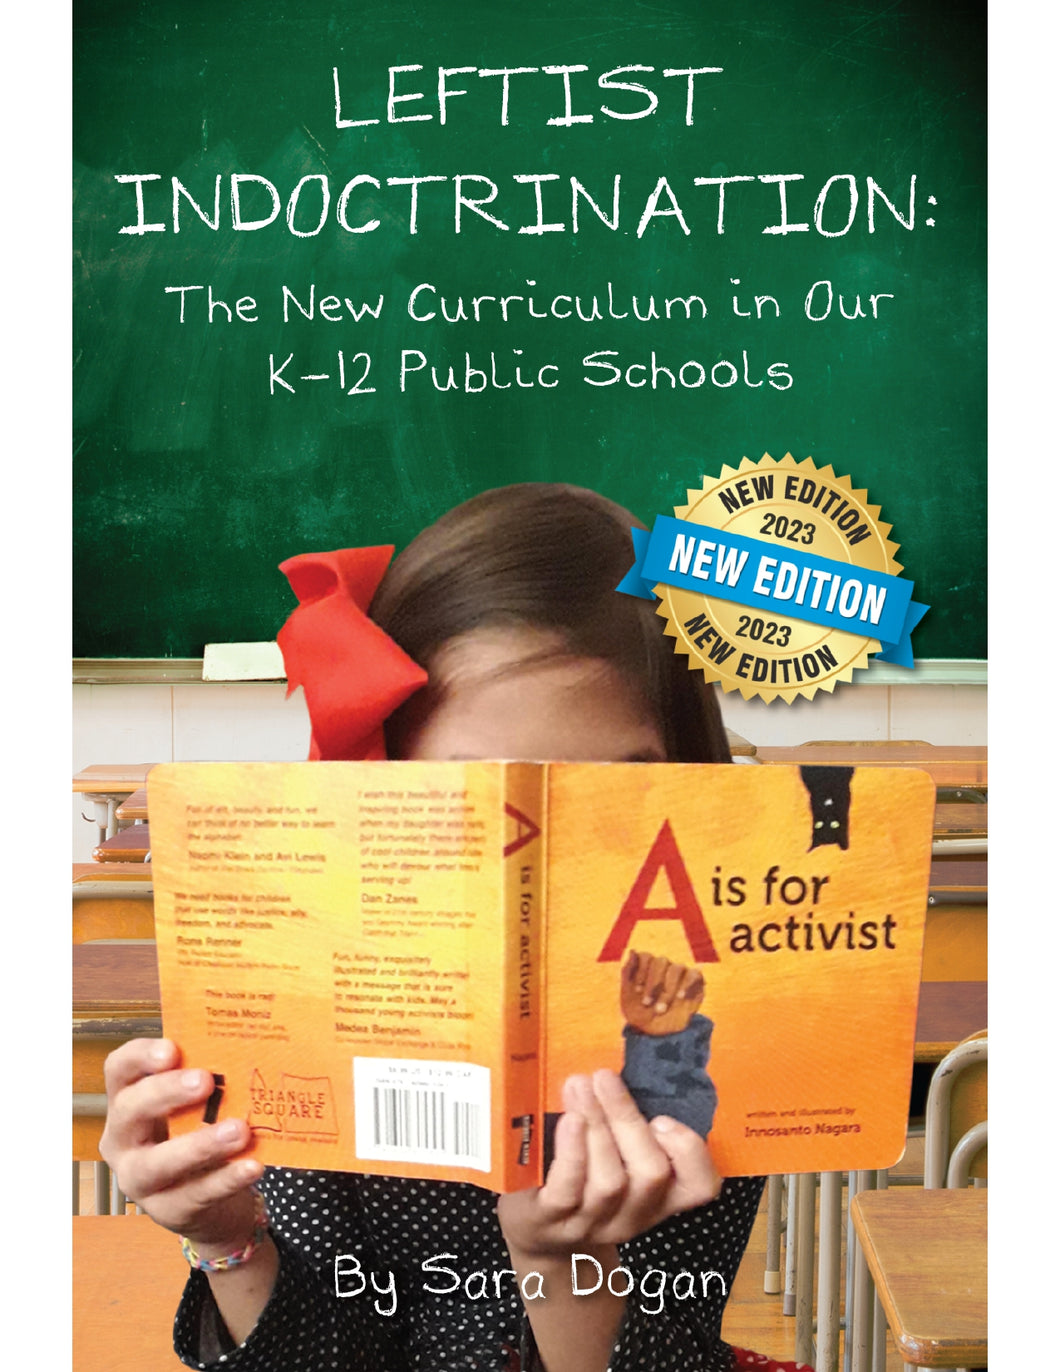 Leftist Indoctrination: The New Curriculum In Our K-12 Public Schools